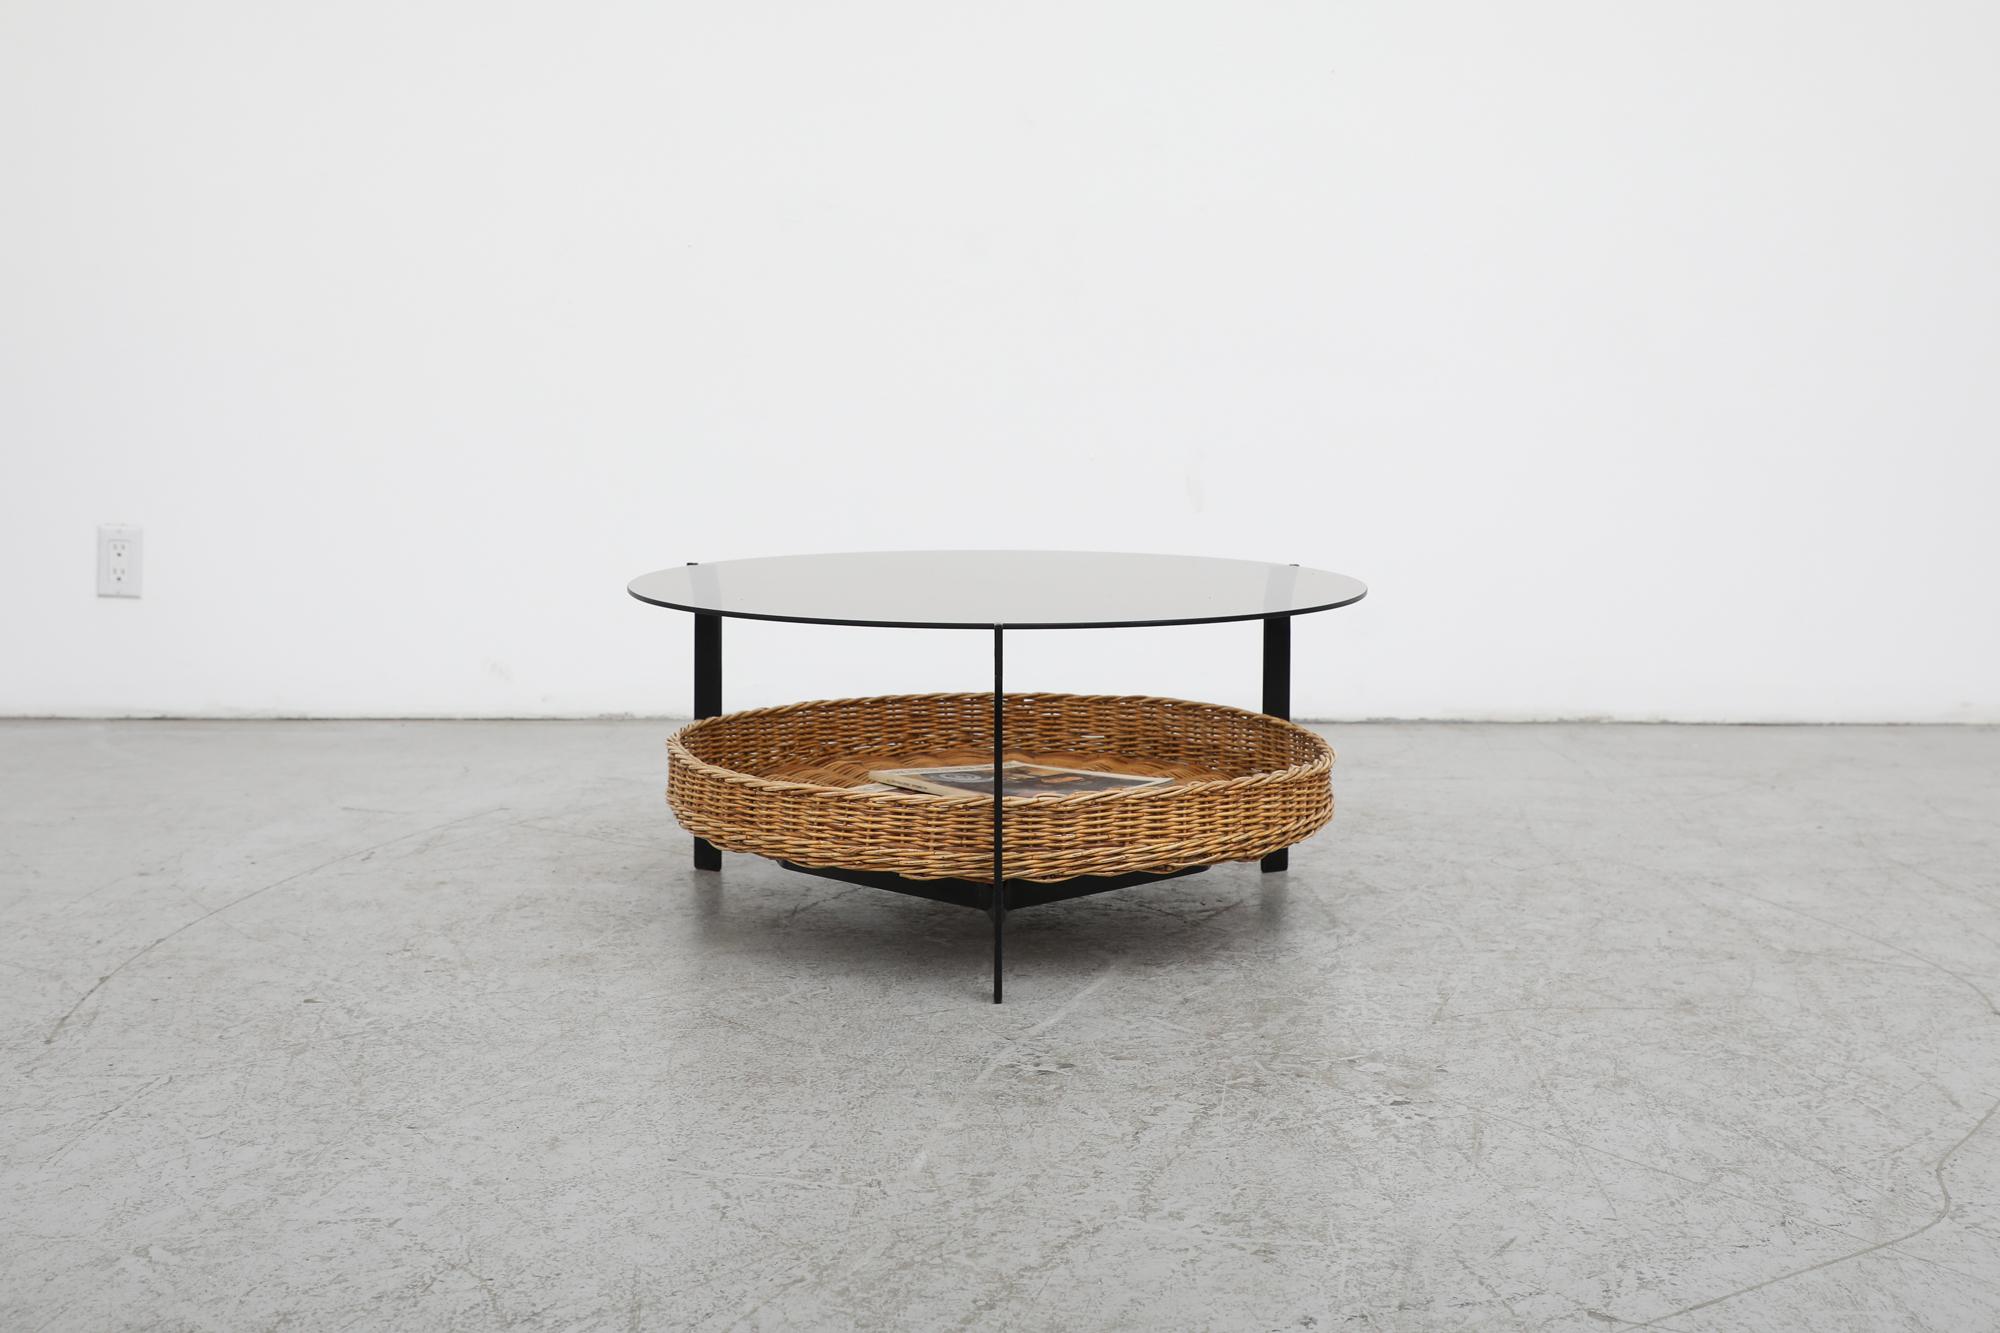 Mid-century, Gebr. Jonkers manufactured, early 1960s, round smoked glass coffee table with lower woven wicker basket on black enameled metal frame. Attributed to designer Dirk van Sliedregt, who was instrumental in translating the use of rattan and